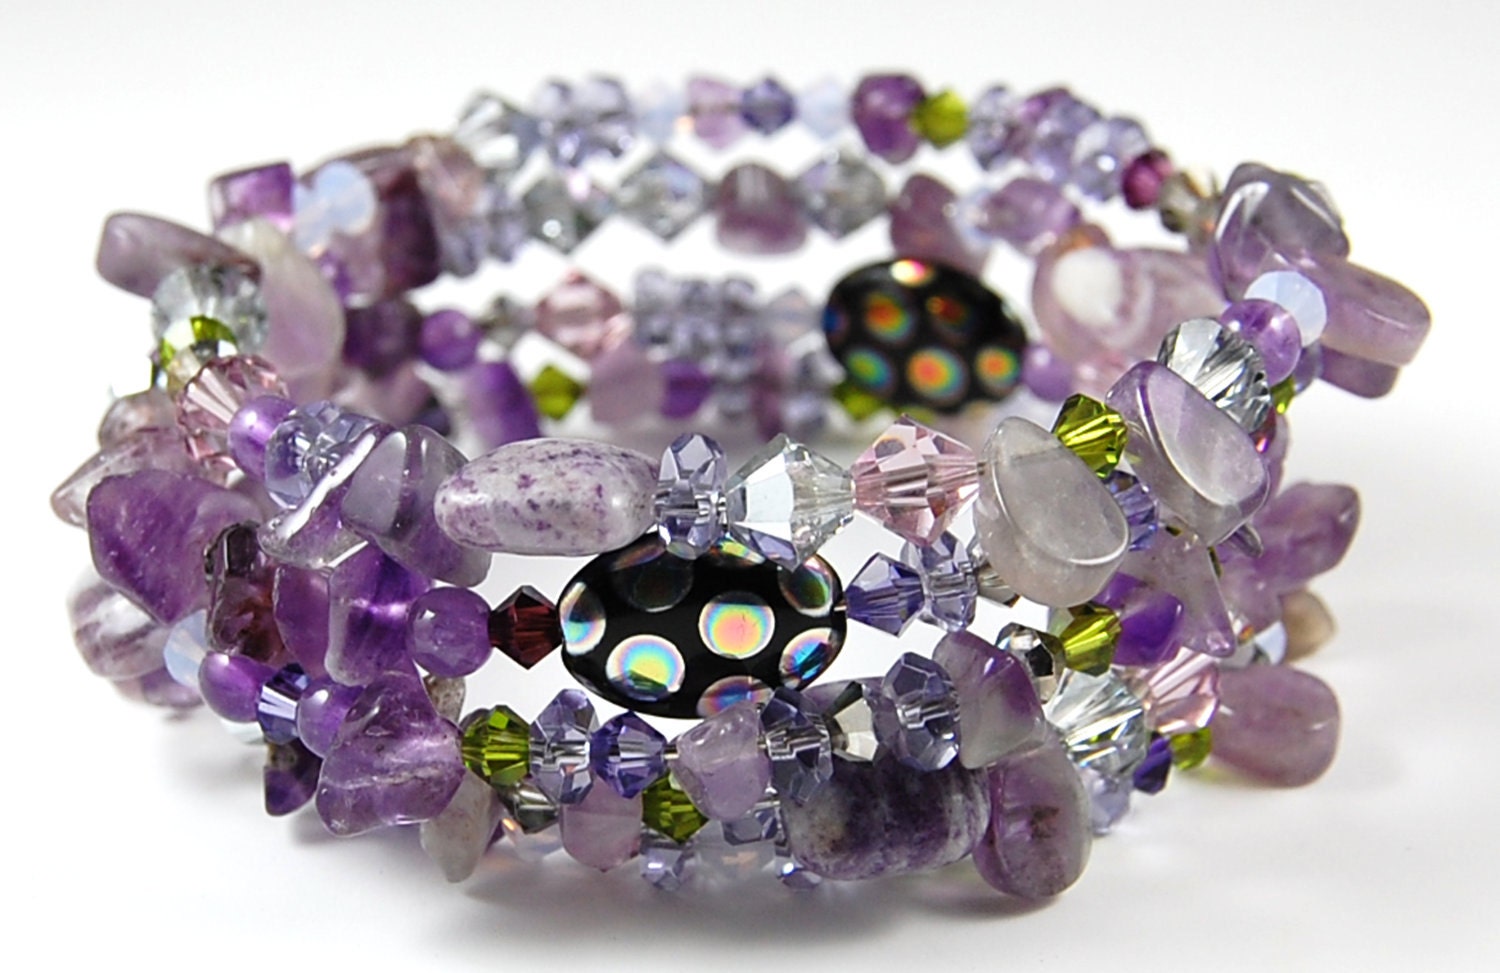 Multi-strand Bracelet - Swarovski Crystals, Amethyst and Peacock Beads - Purple with a Touch of Green